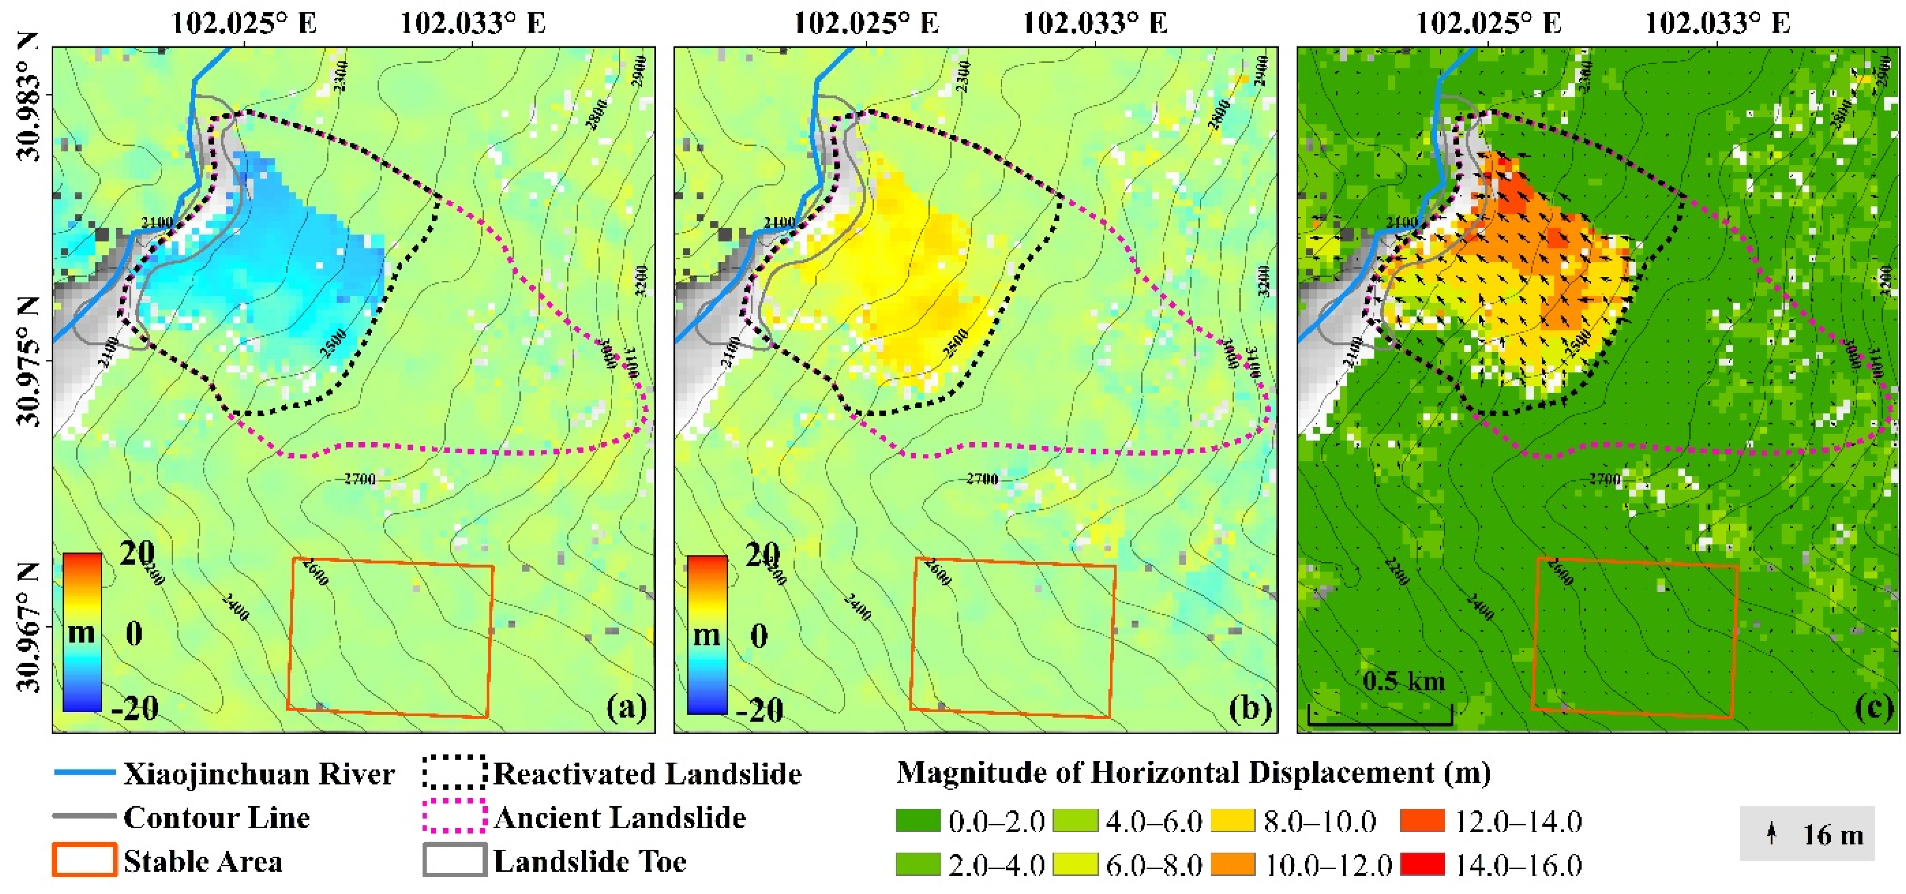 Remote Sensing Free Full Text Displacement Characterization And Spatial Temporal Evolution Of The 2020 Aniangzhai Landslide In Danba County Using Time Series Insar And Multi Temporal Optical Dataset Html